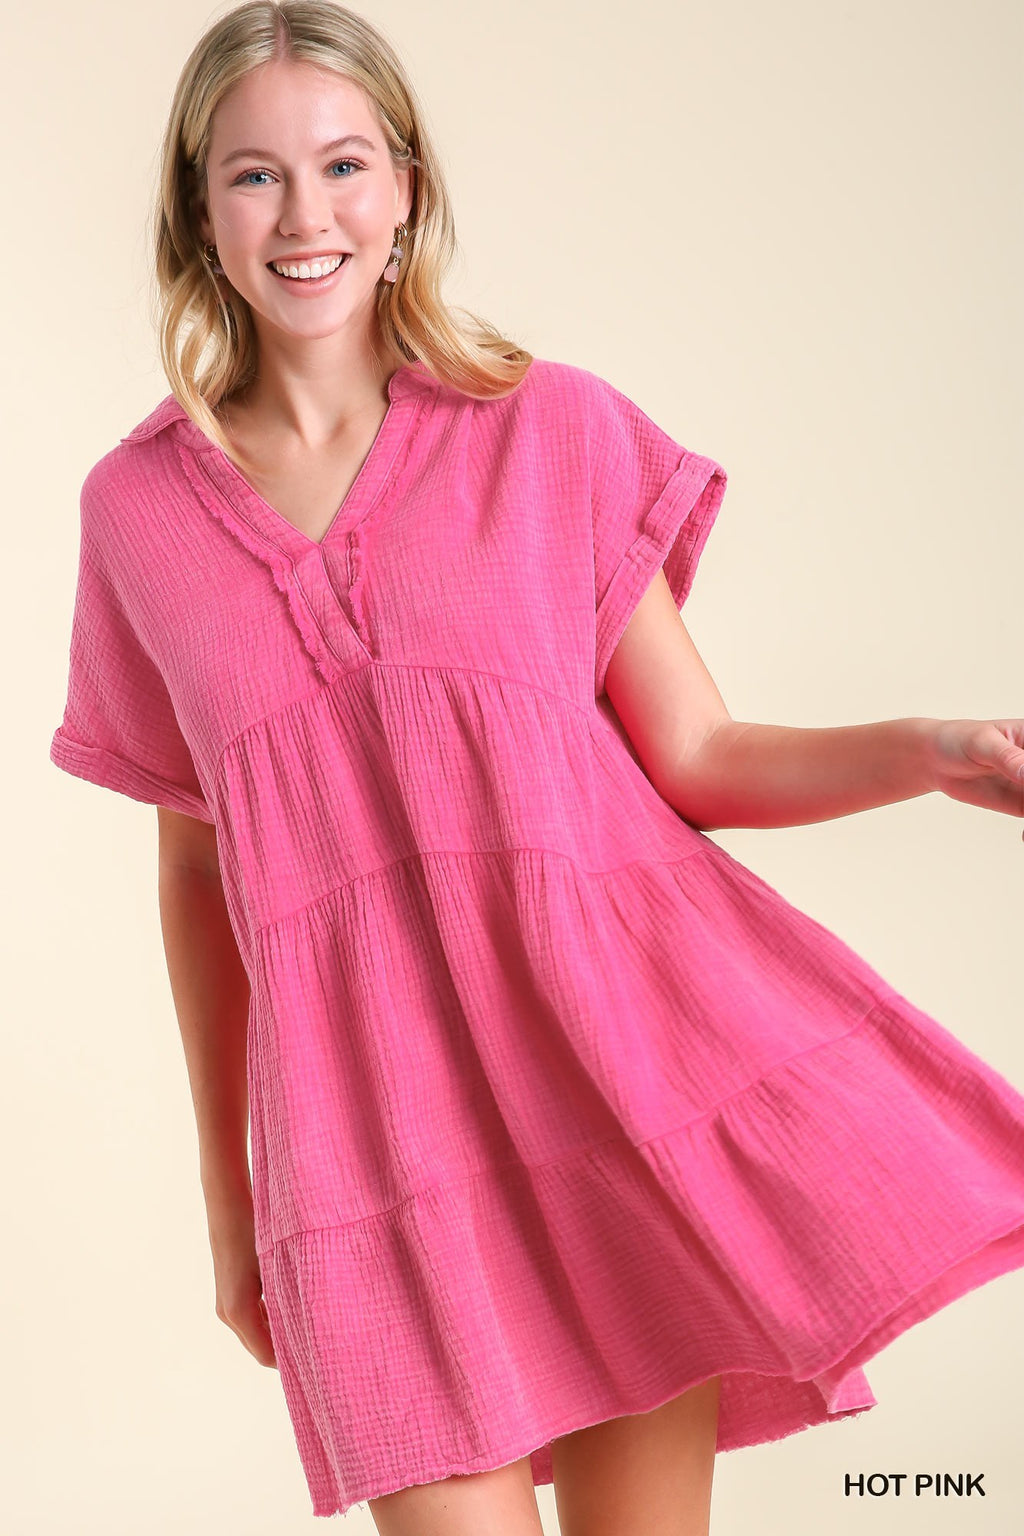 Hot Pink Mineral Wash Umgee Baby Doll Tiered Dress